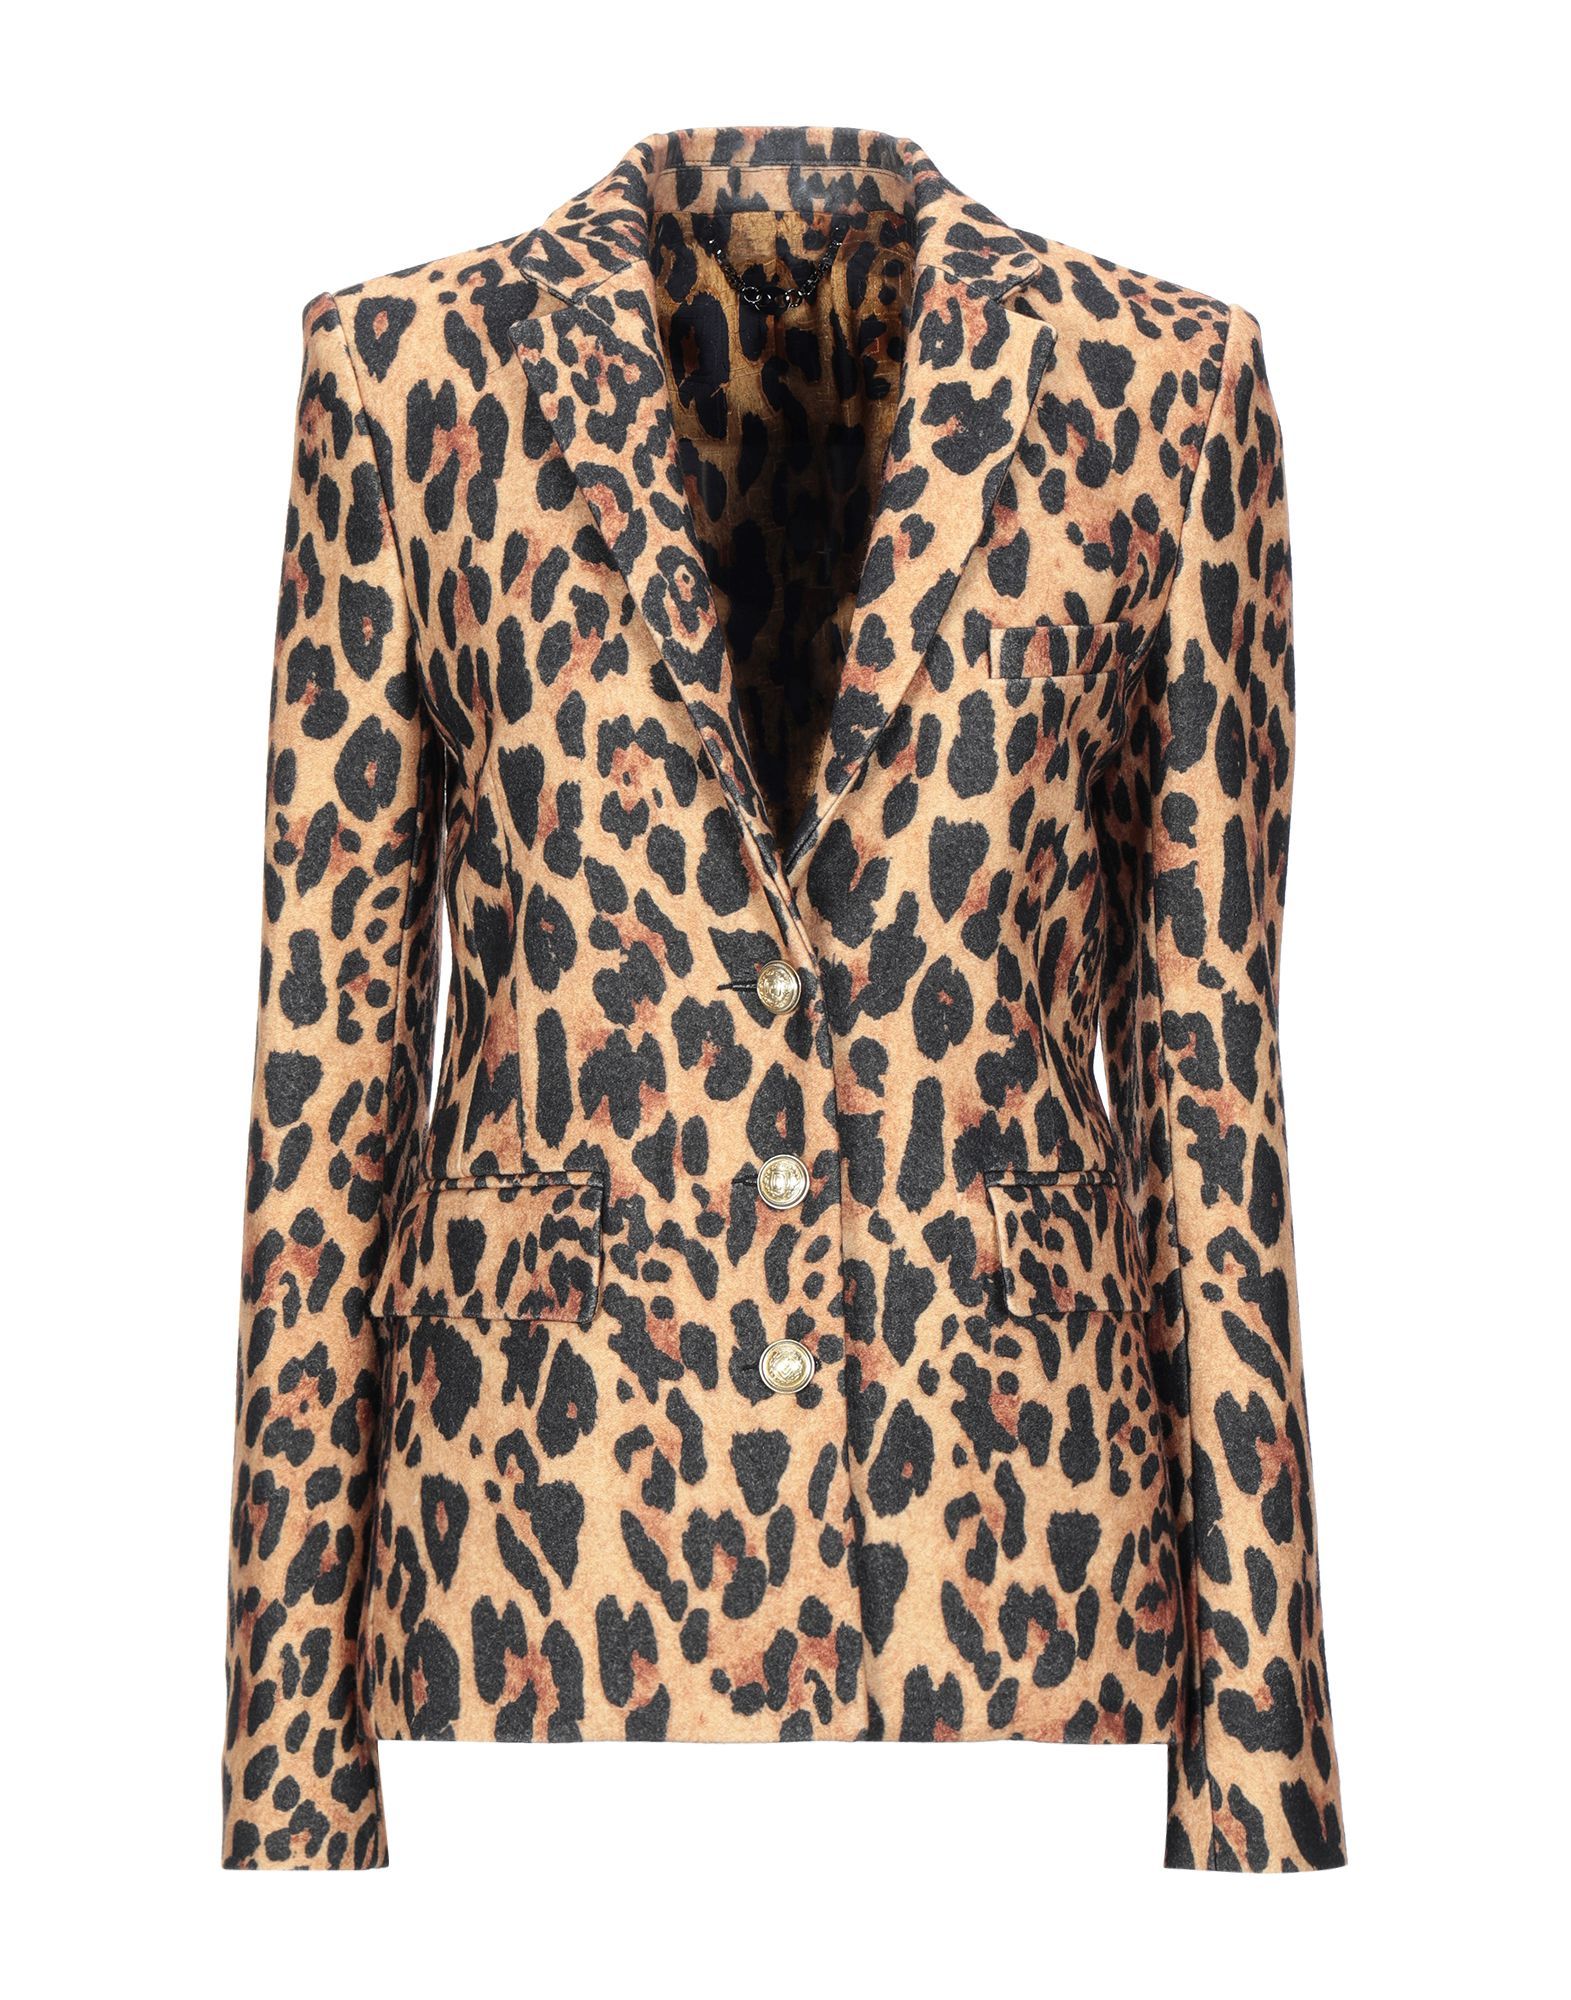 baize, no appliqués, leopard-print, multipockets, single chest pocket, two inside pockets, button closing, lapel collar, single-breasted , long sleeves, fully lined, back split